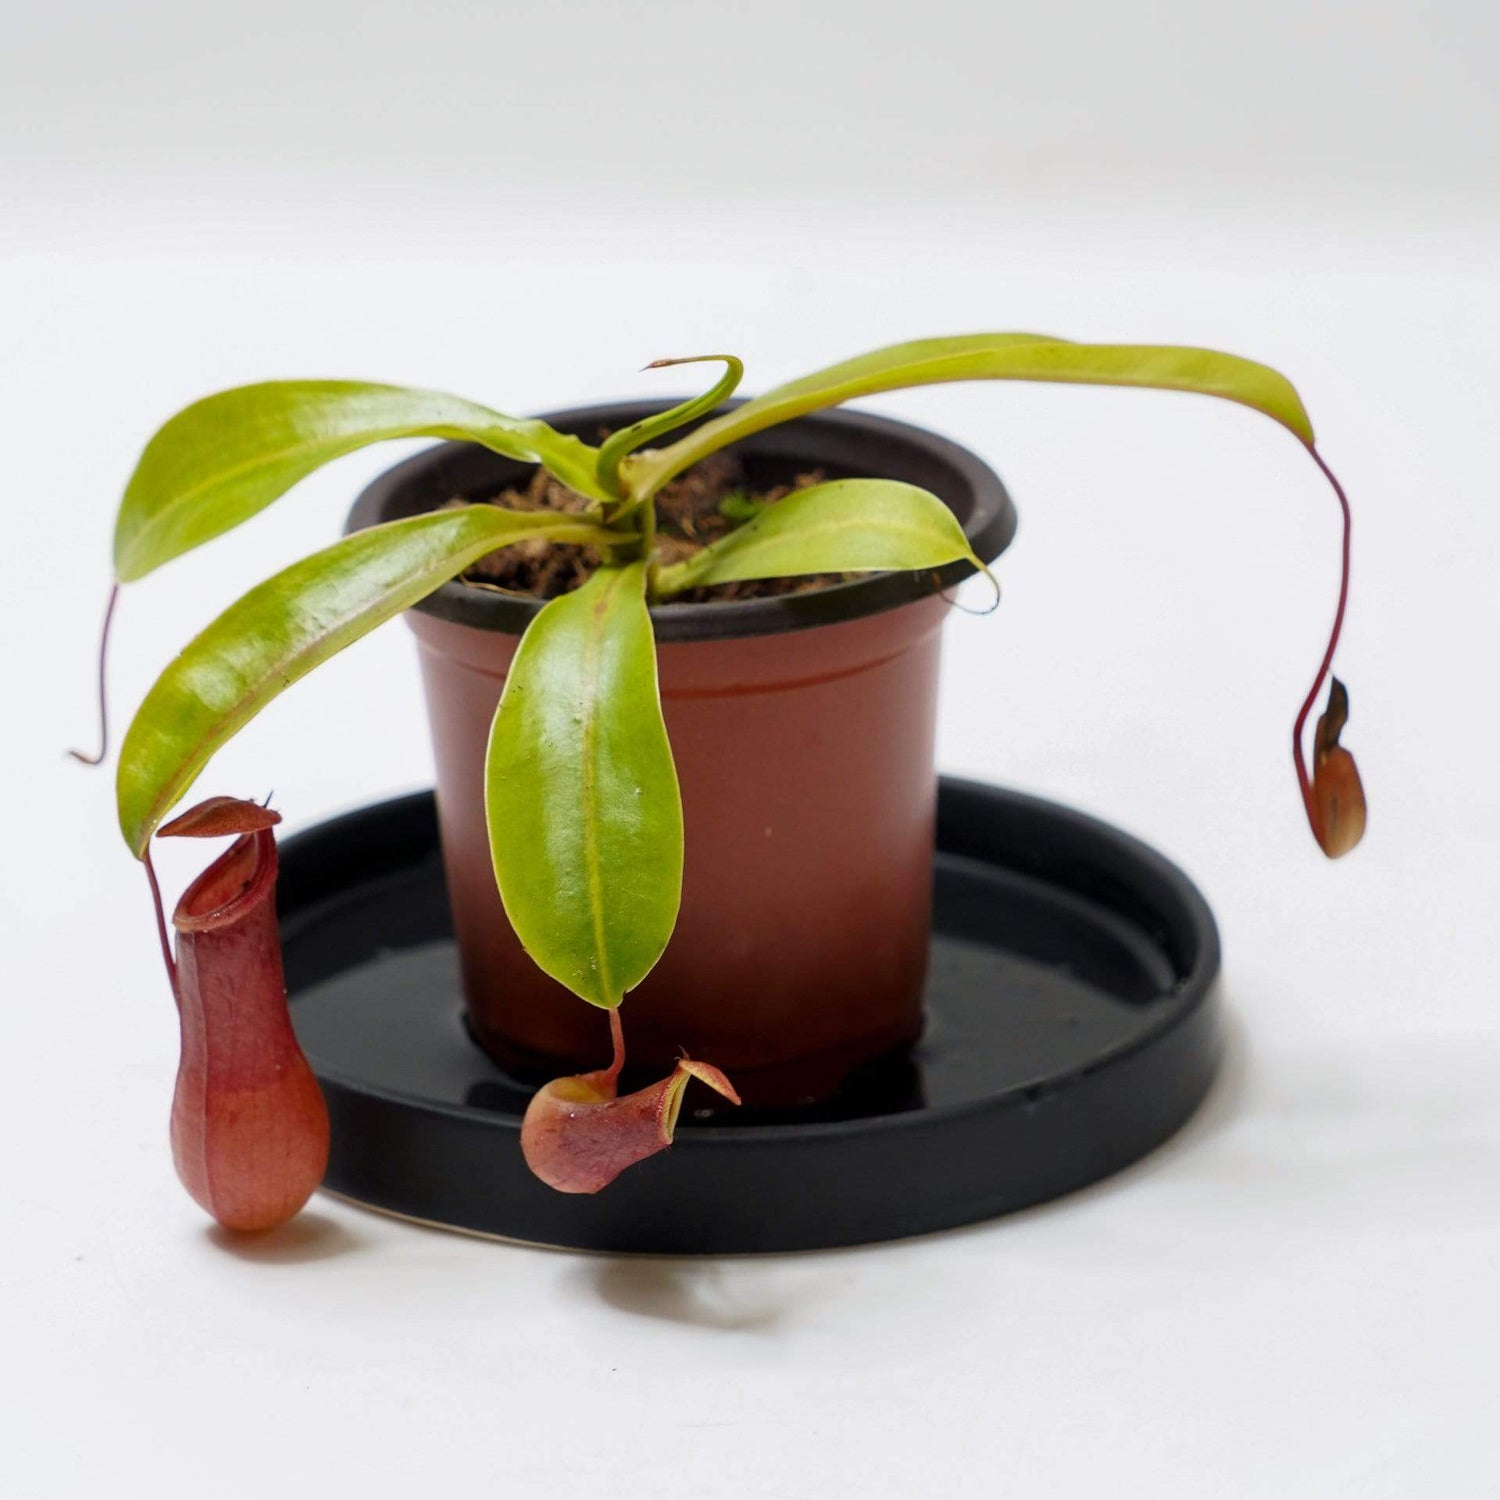 Urban Sprouts Plant 4" in nursery pot Carnivorous 'Monkey Pitcher'